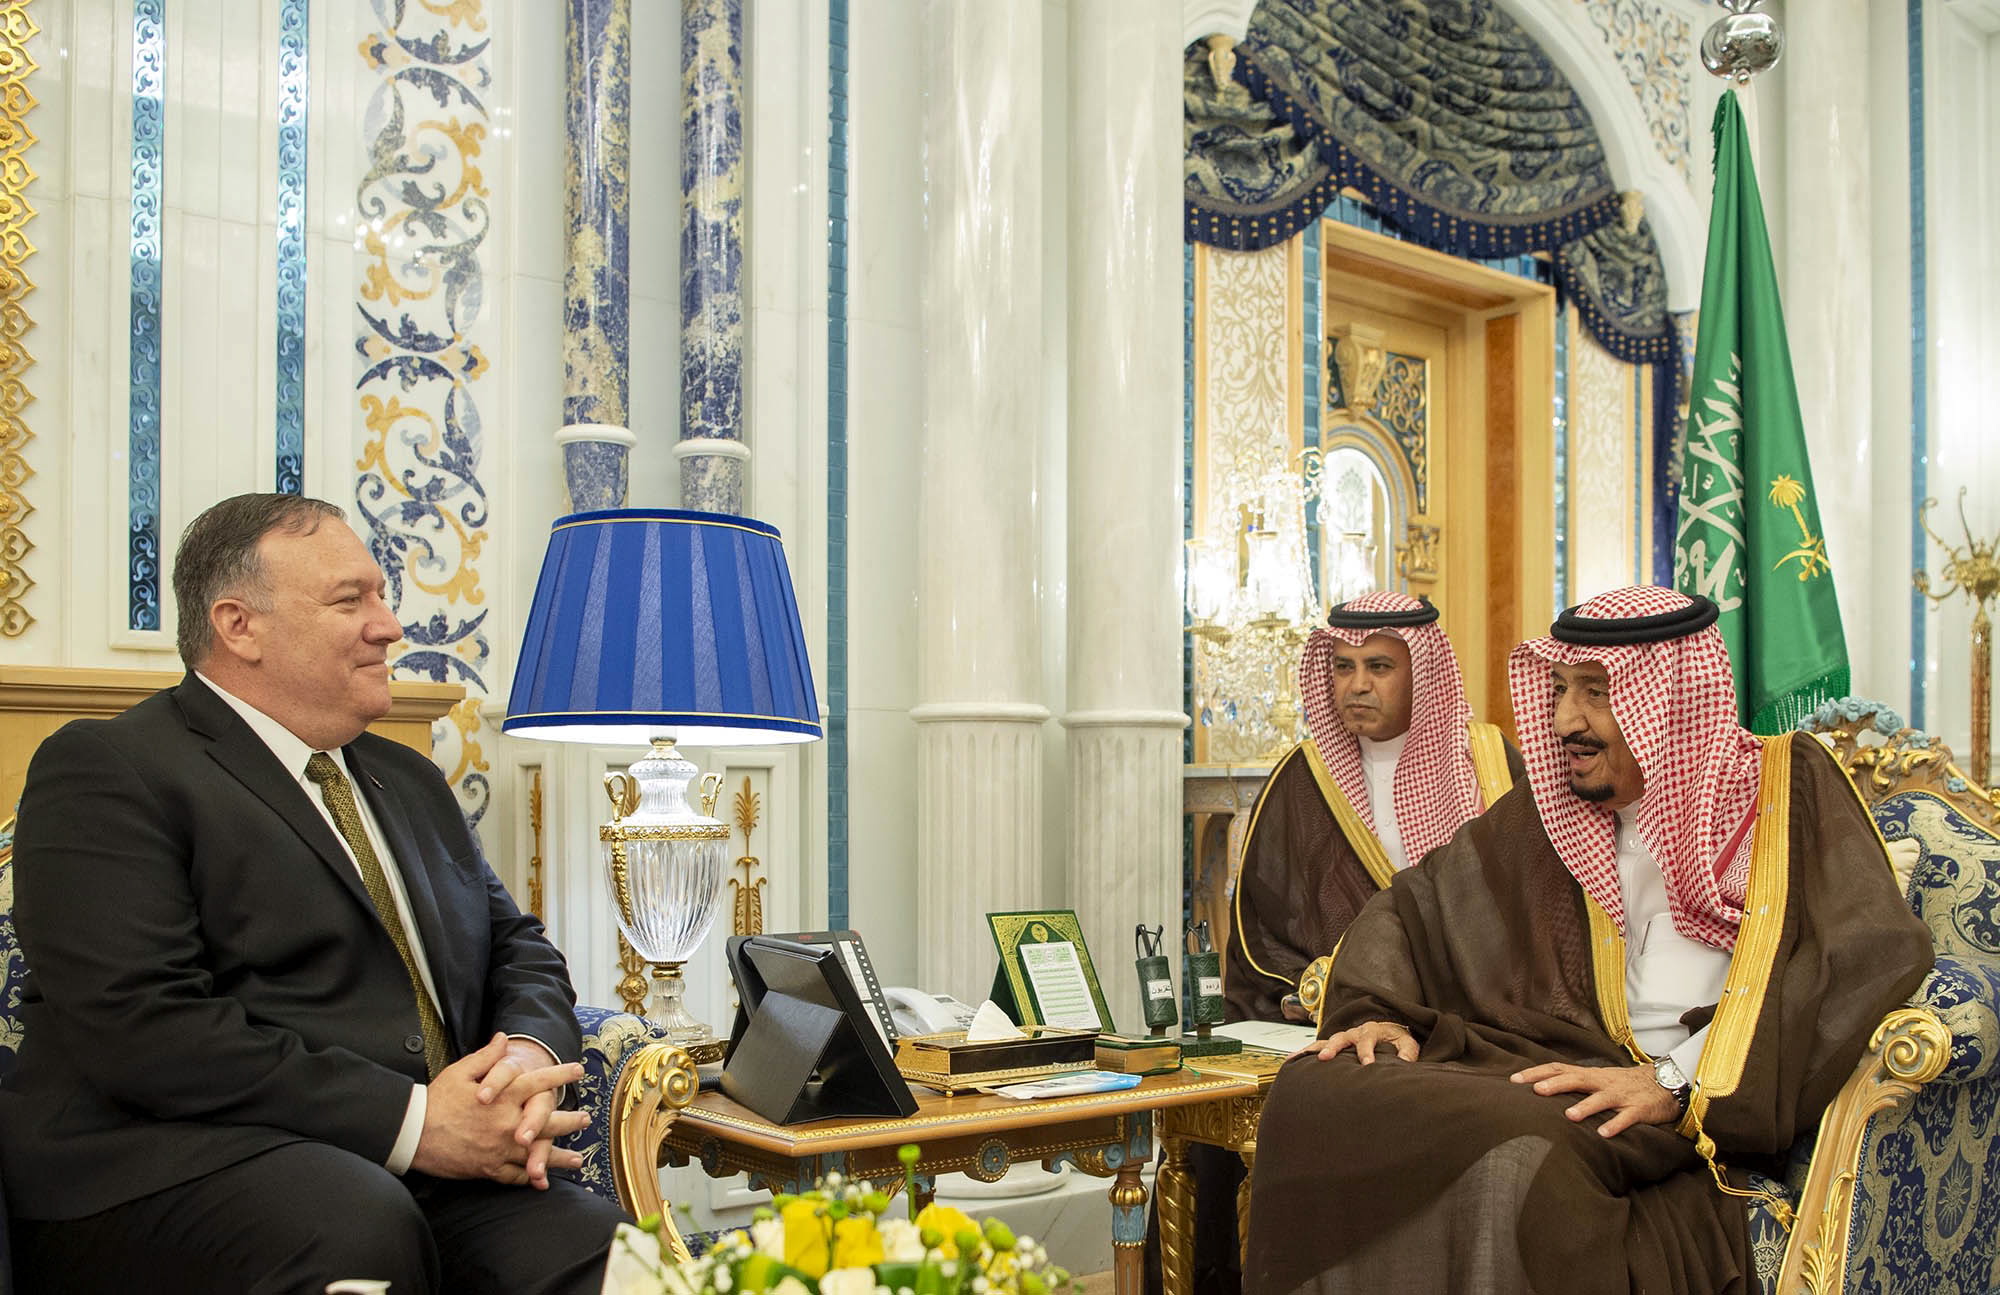 epa07670052 Saudi King Salman (R) receives US Secretary of State Mike Pompeo in Jeddah, Saudi Arabia, 24 June 2019. Pompeo arrived in Saudi Arabia for talks amid continuing tension between the US and Iran.  EPA/BANDAR AL-GALOUD / SAUDI ROYAL PALACE HANDOUT  HANDOUT EDITORIAL USE ONLY/NO SALES